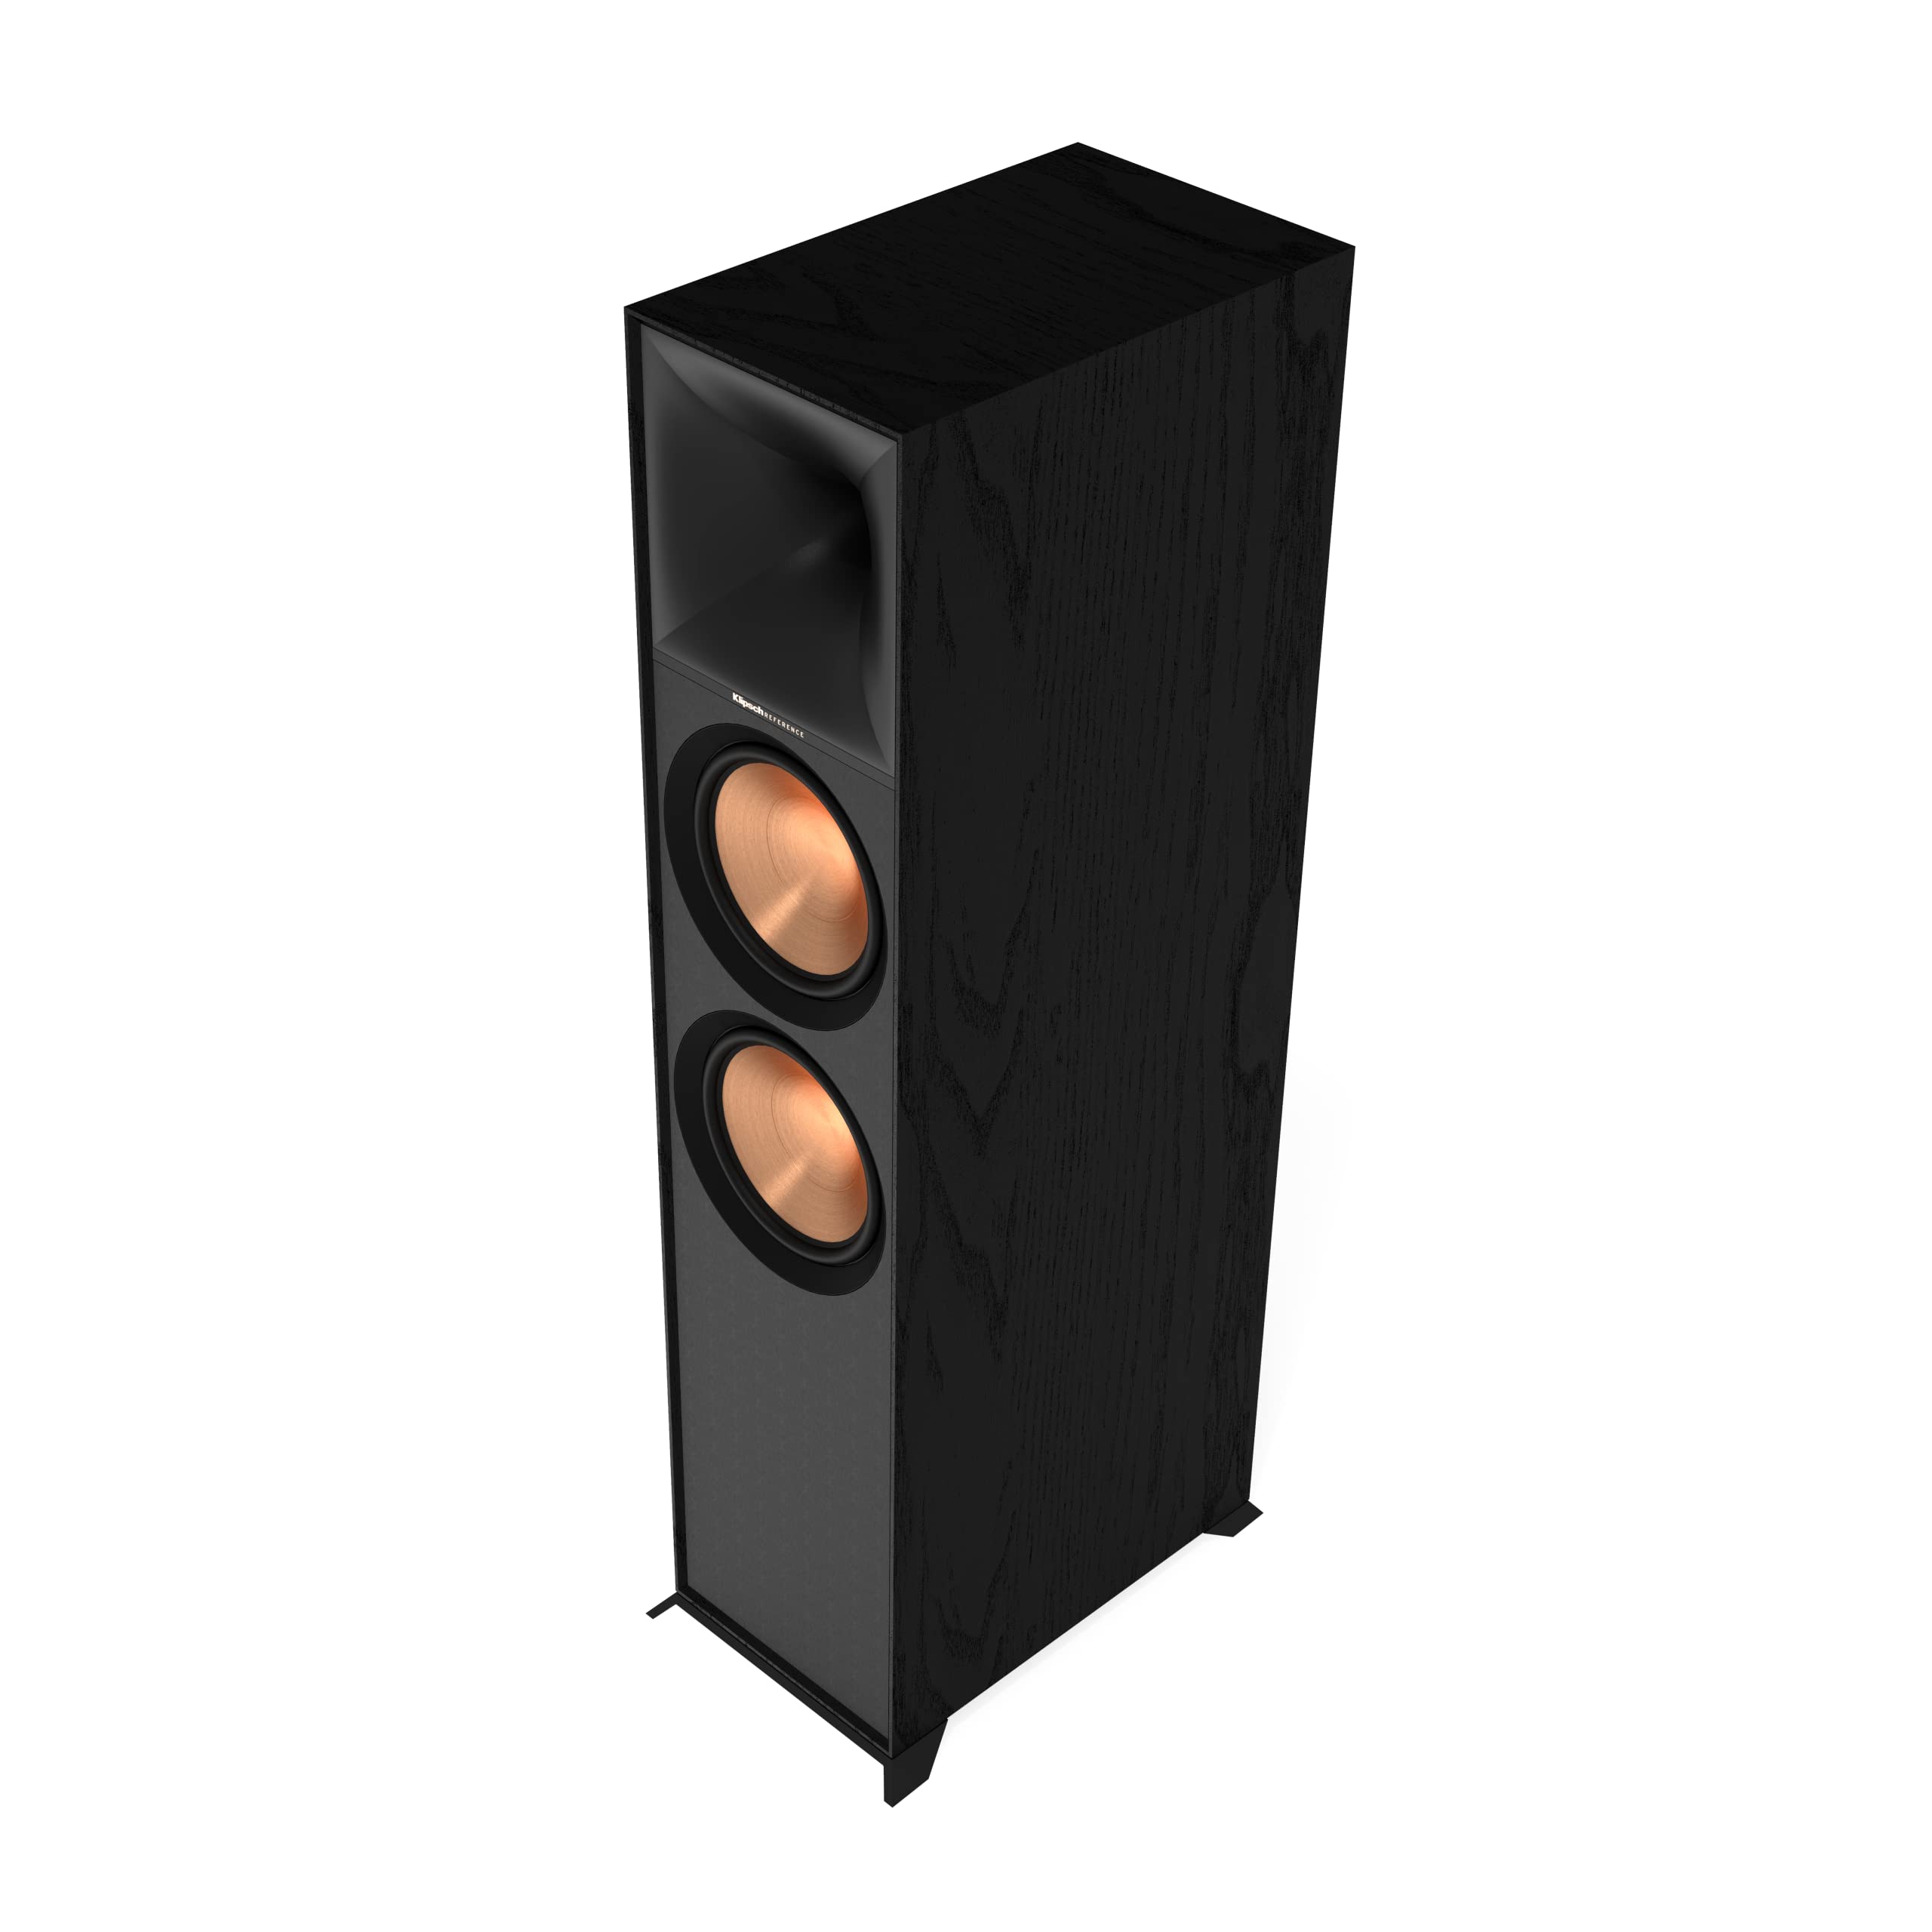 Klipsch Reference Next-Generation R-800F Horn-Loaded Floorstanding Speaker for Best-in-Class Home Theater